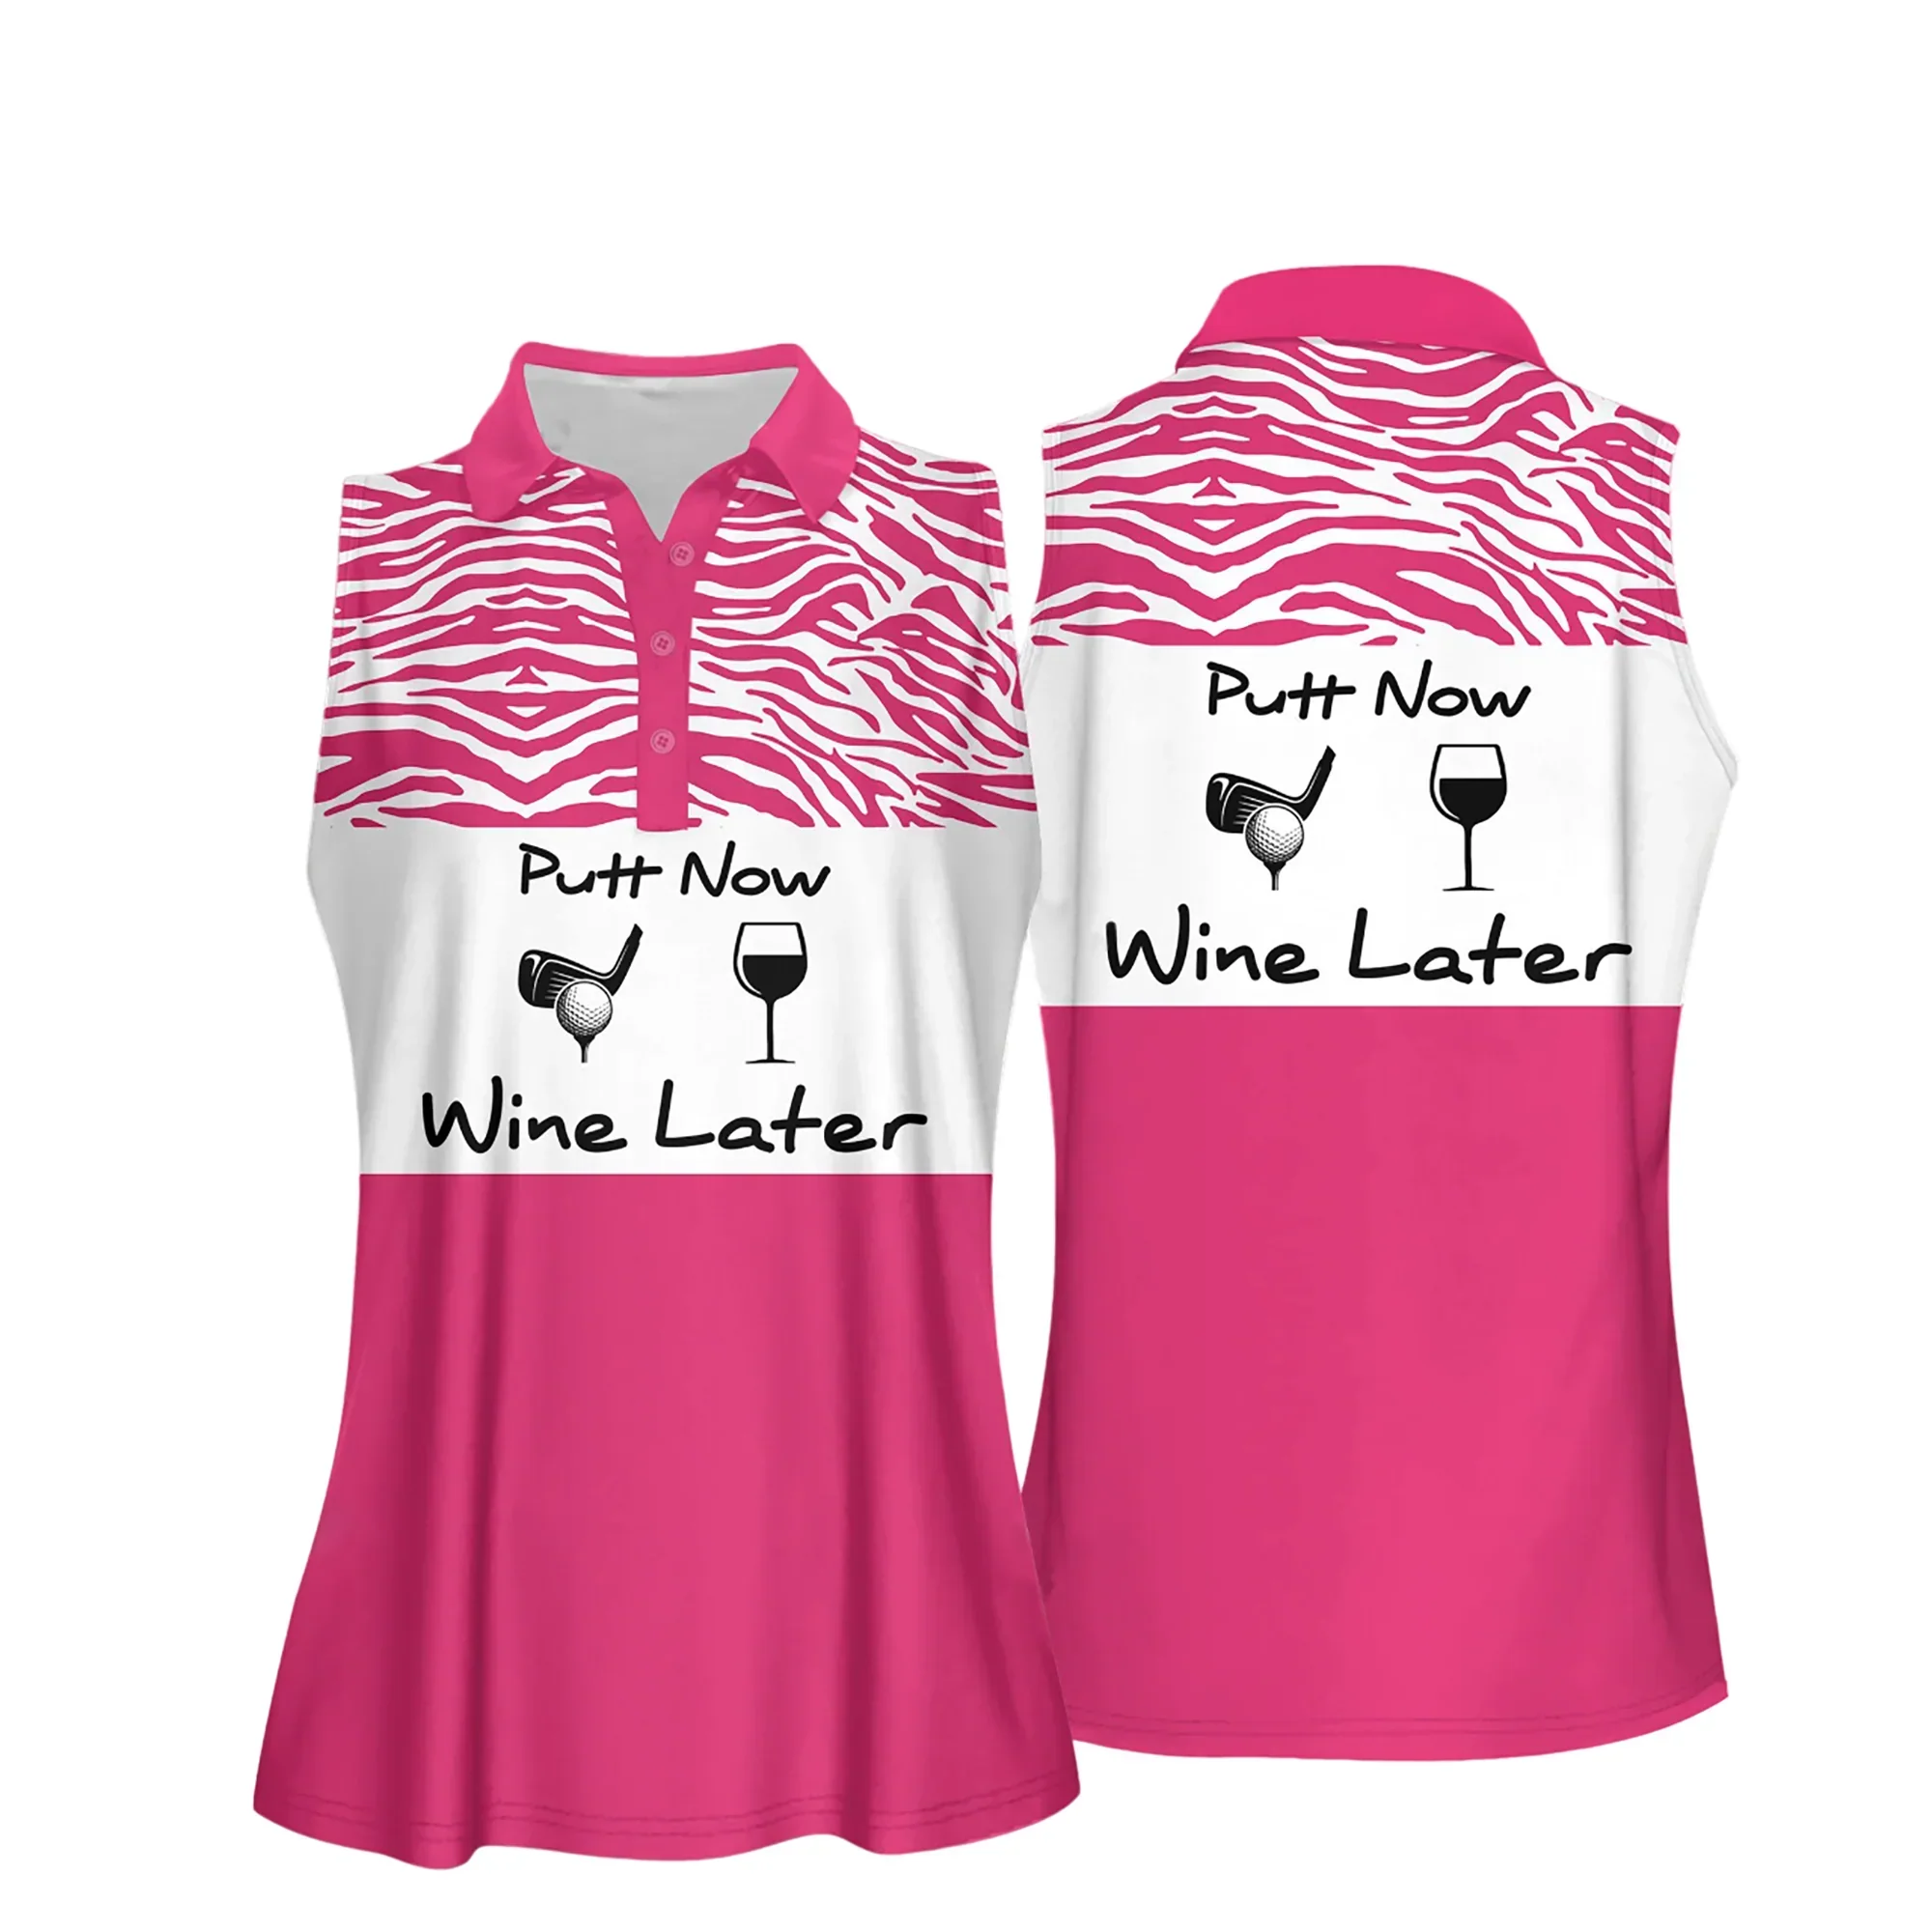 Golf And Wine Women Polo Shirt, Putt Now Wine Later, Pink Putt Now Wine Later Women Polo Shirt - Gift For Mother's Day, Golfers, Female, Golf Lover